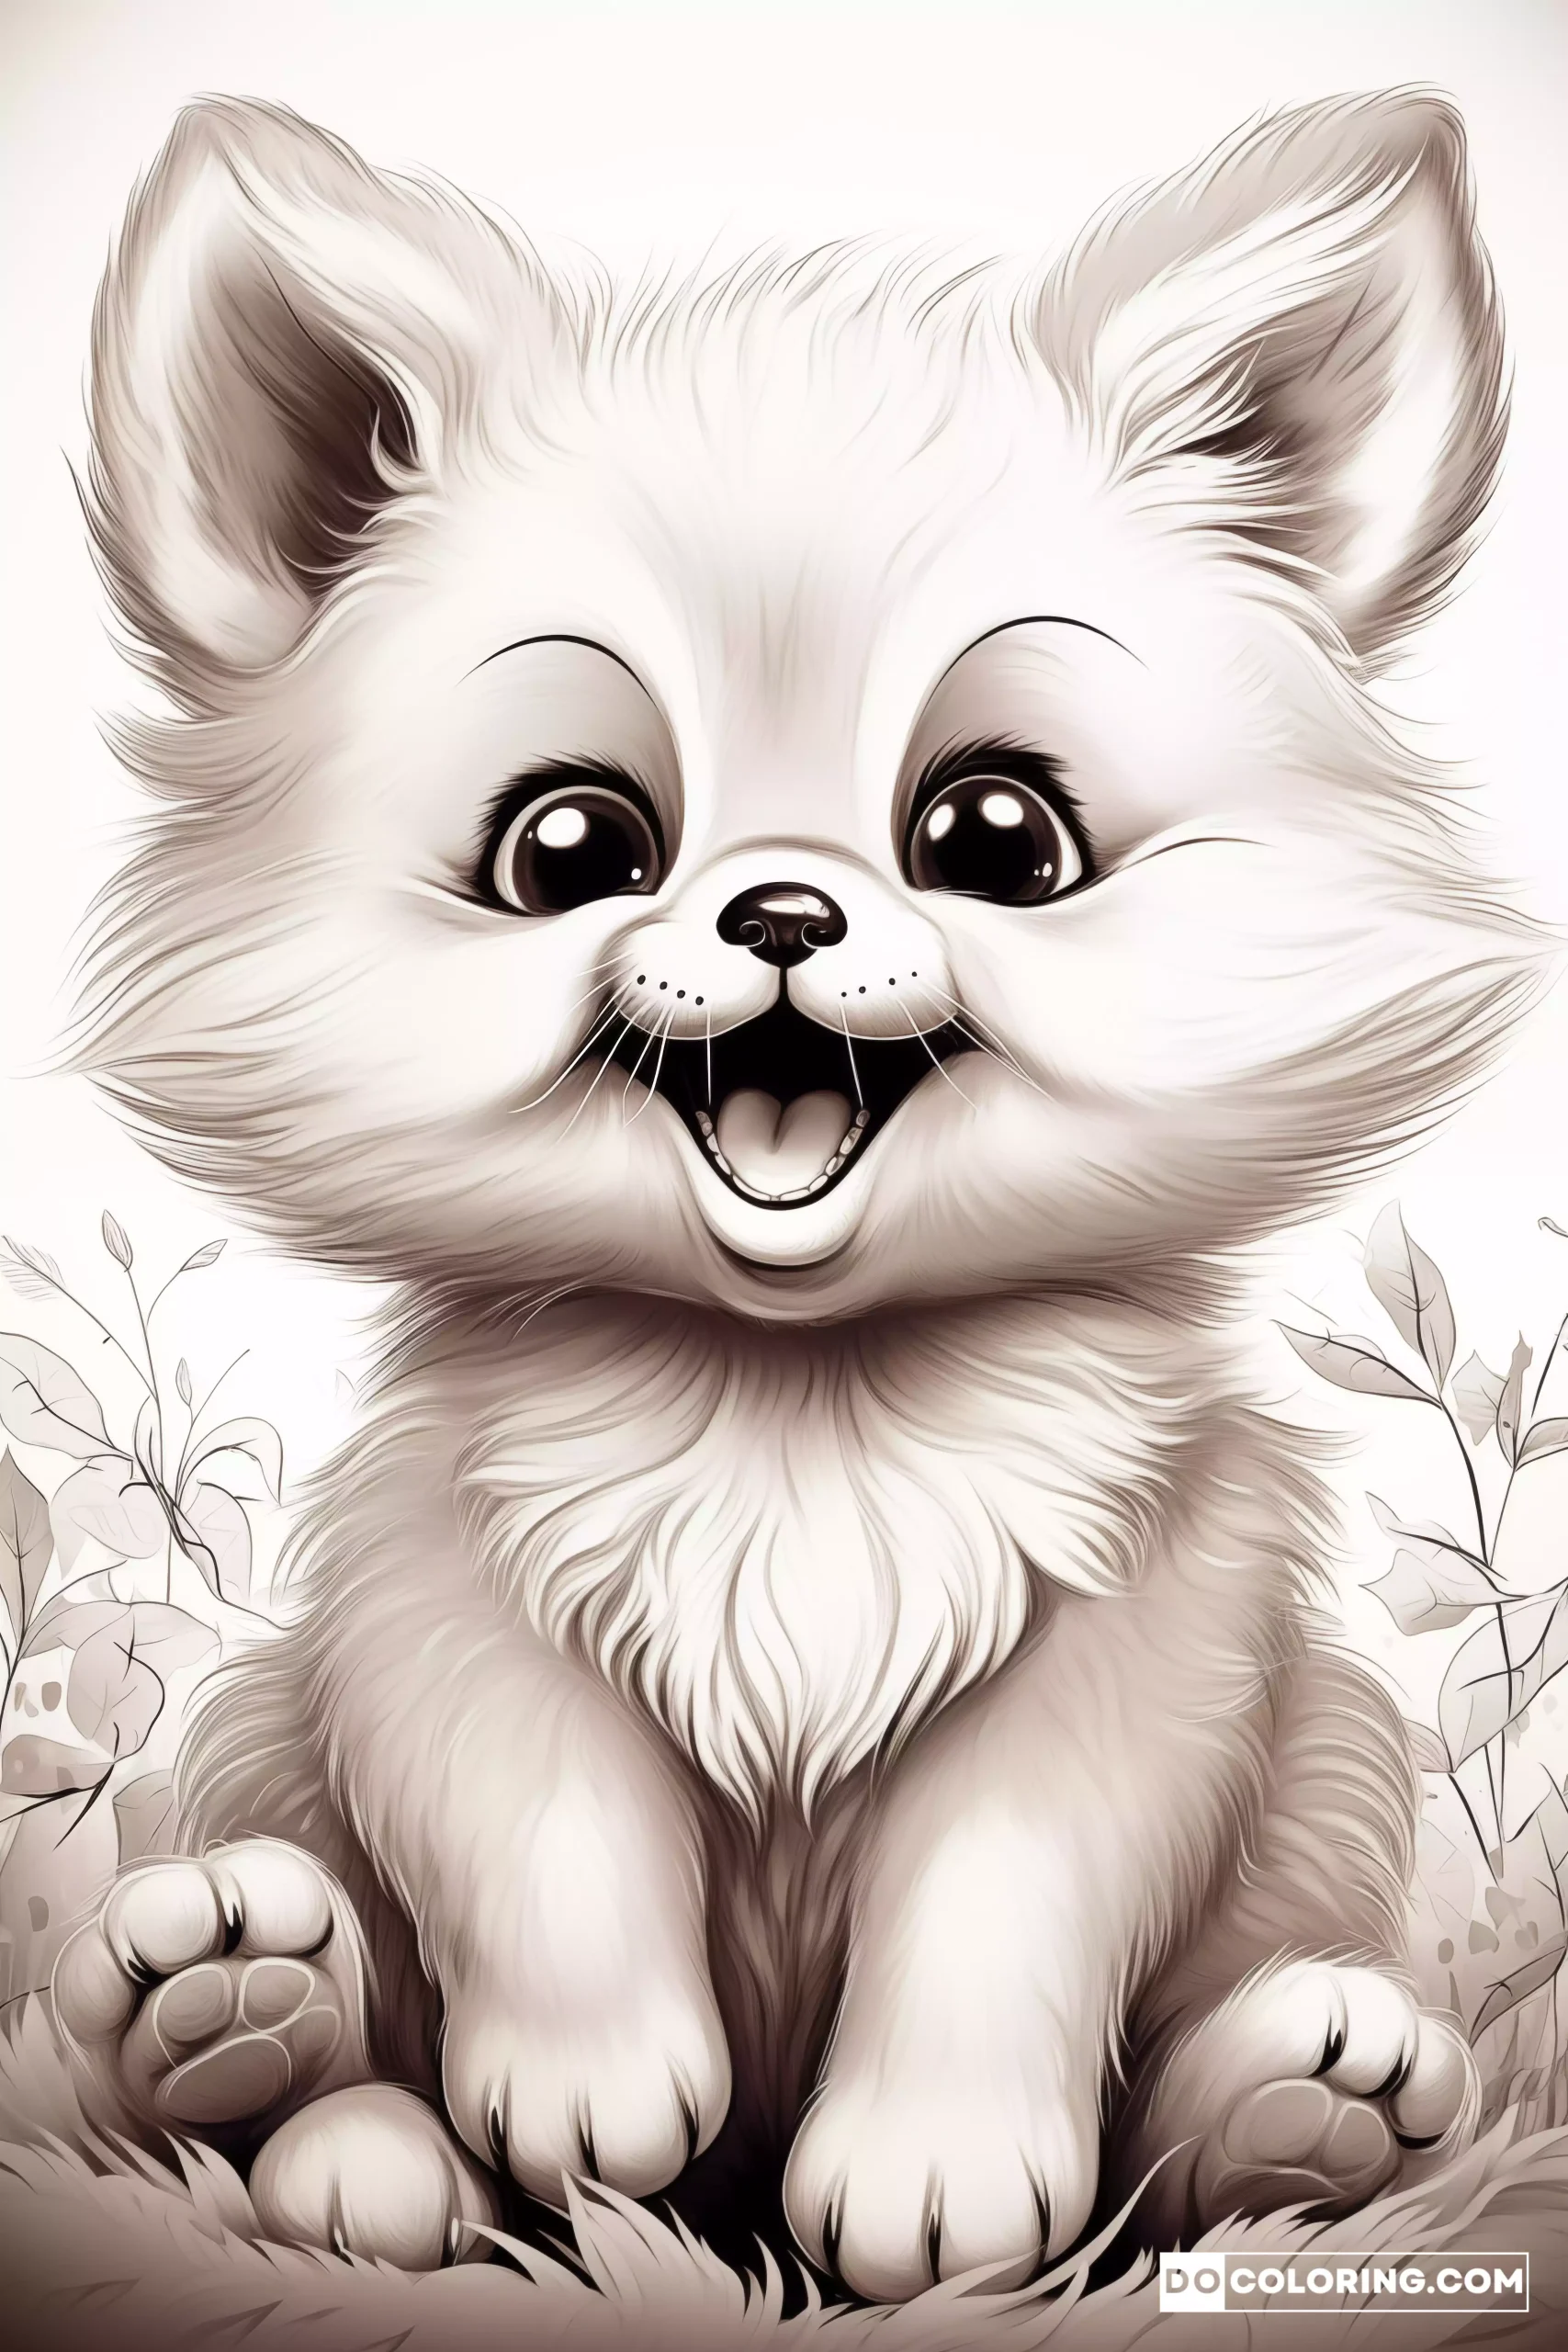 A detailed illustration of a baby fox, capturing its innocence and charm, ideal for mindful coloring for adults.